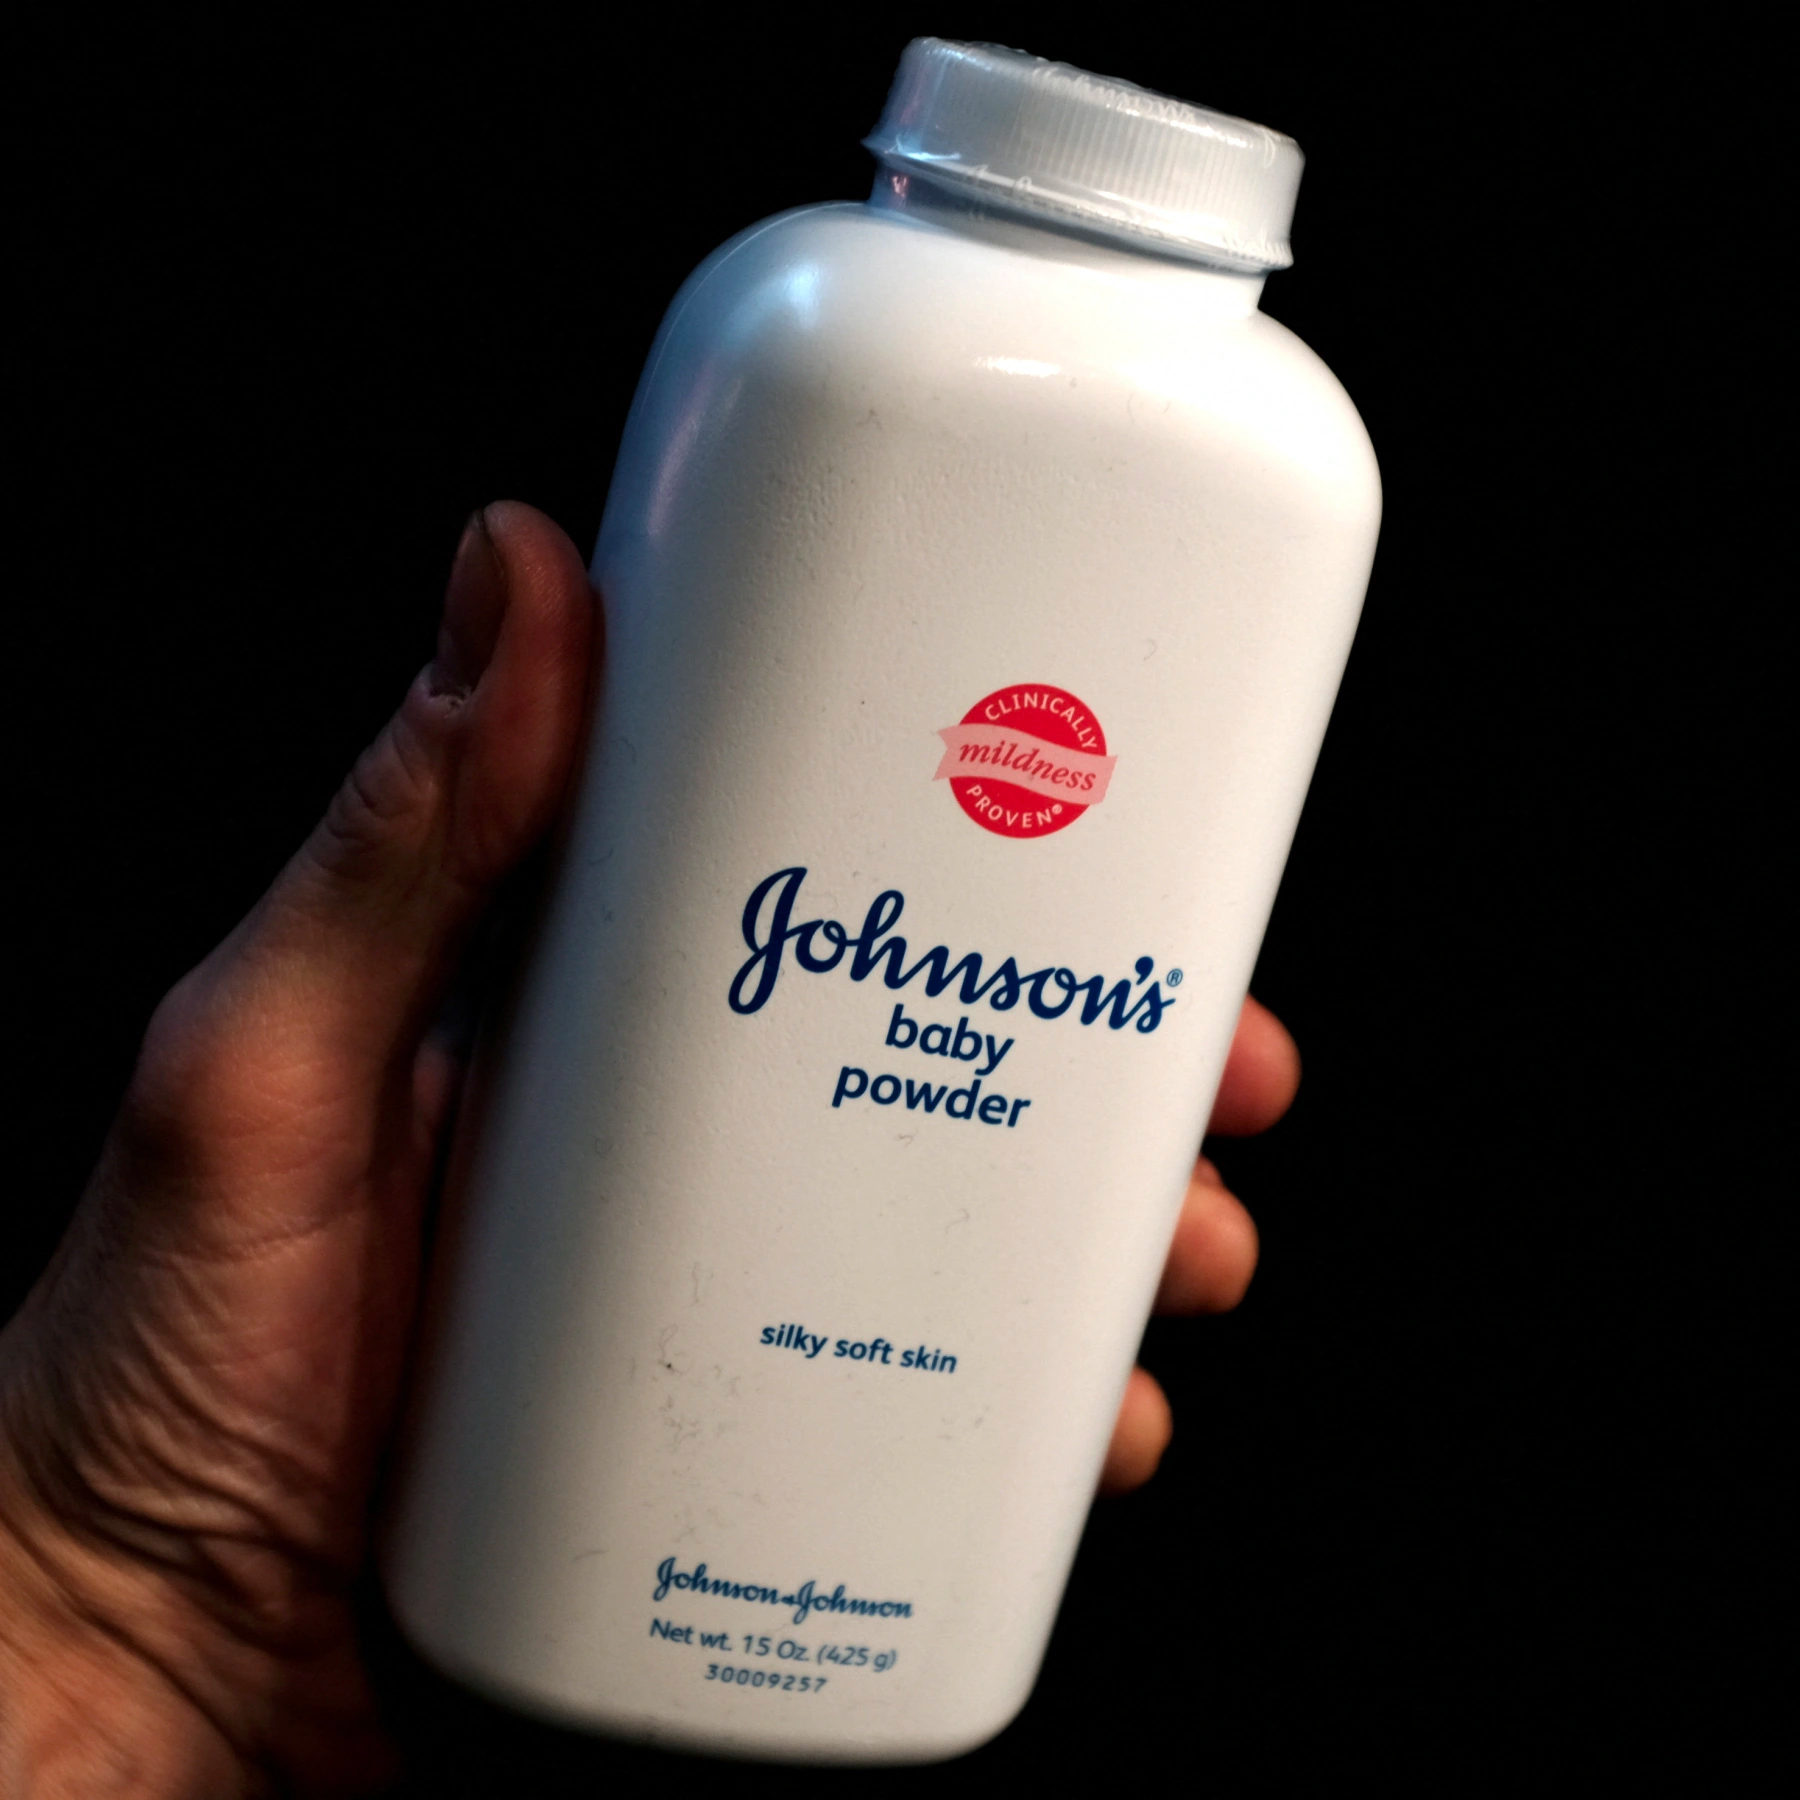 Johnson & Johnson will stop selling talcum-based baby powder after cancer lawsuit